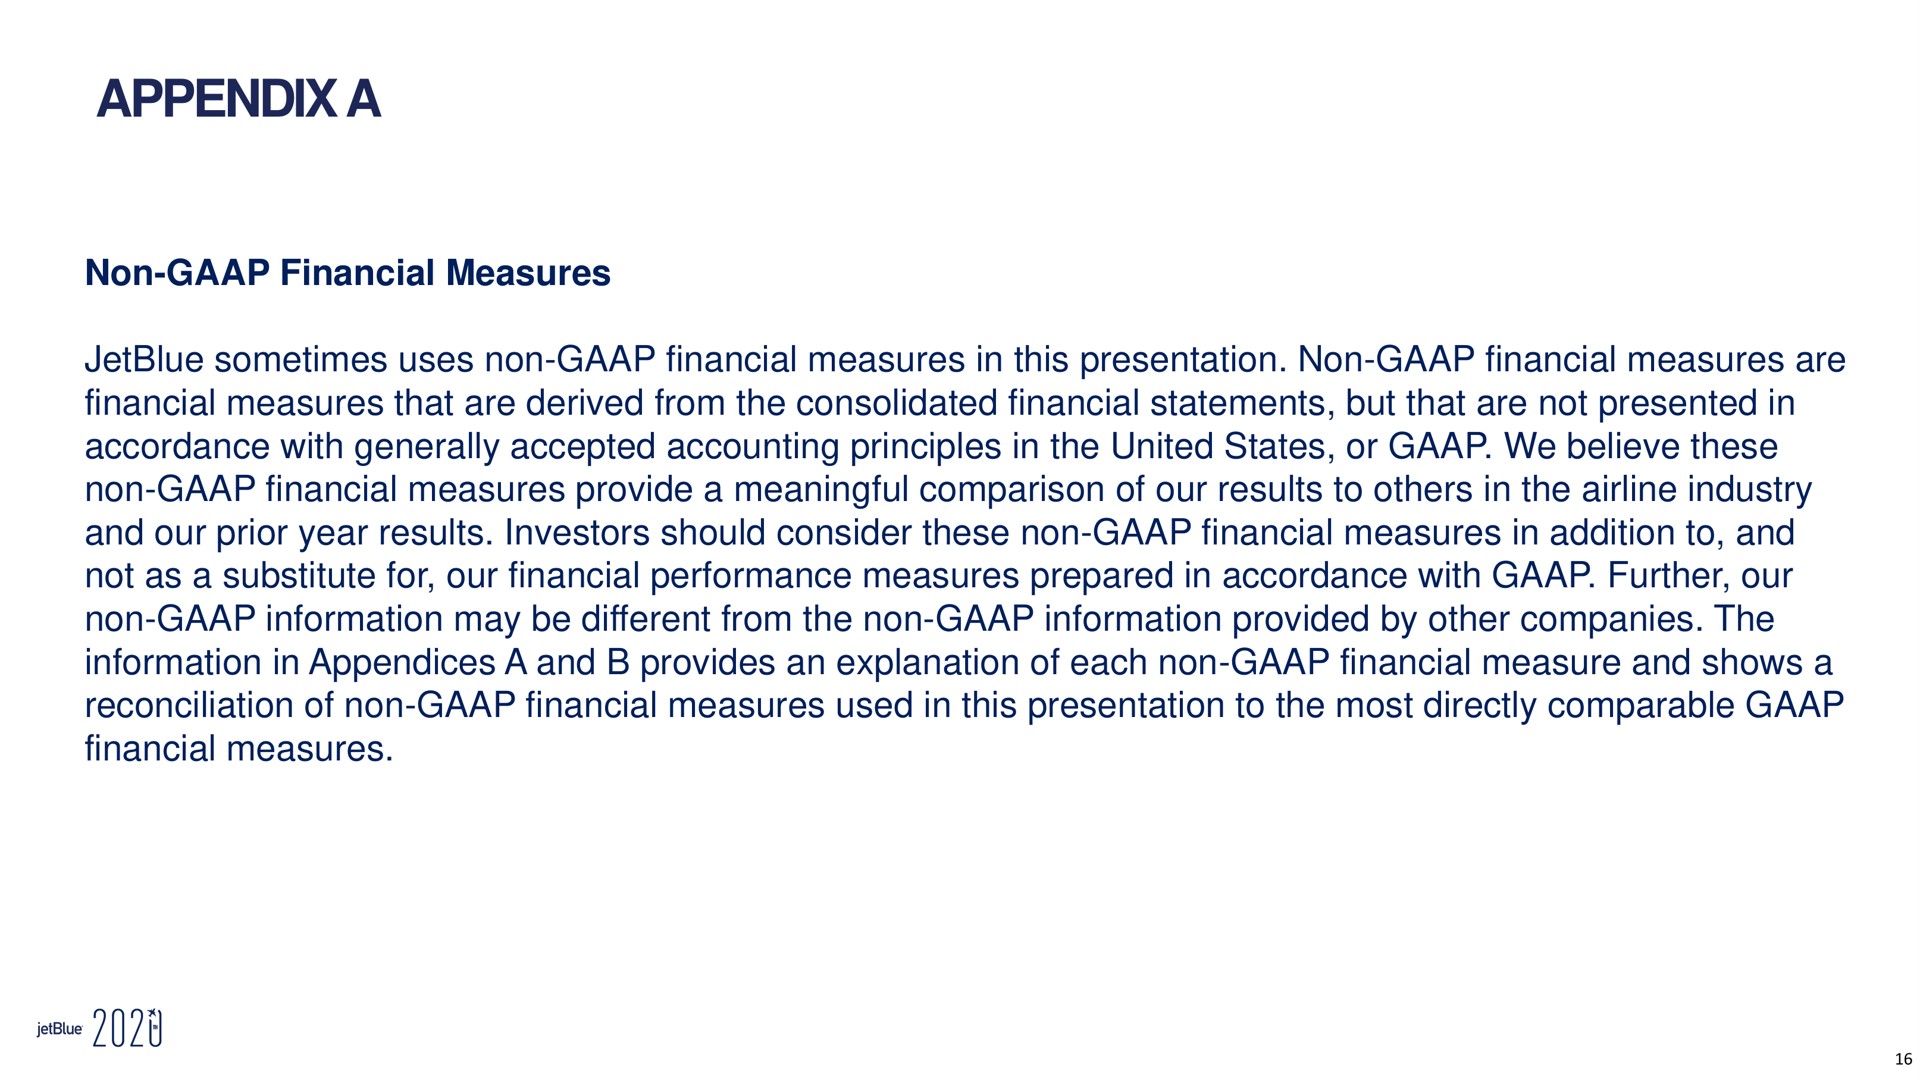 appendix a non financial measures sometimes uses non financial measures in this presentation non financial measures are financial measures that are derived from the consolidated financial statements but that are not presented in accordance with generally accepted accounting principles in the united states or we believe these non financial measures provide a meaningful comparison of our results to in the industry and our prior year results investors should consider these non financial measures in addition to and not as a substitute for our financial performance measures prepared in accordance with further our non information may be different from the non information provided by other companies the information in appendices a and provides an explanation of each non financial measure and shows a reconciliation of non financial measures used in this presentation to the most directly comparable financial measures woe | jetBlue